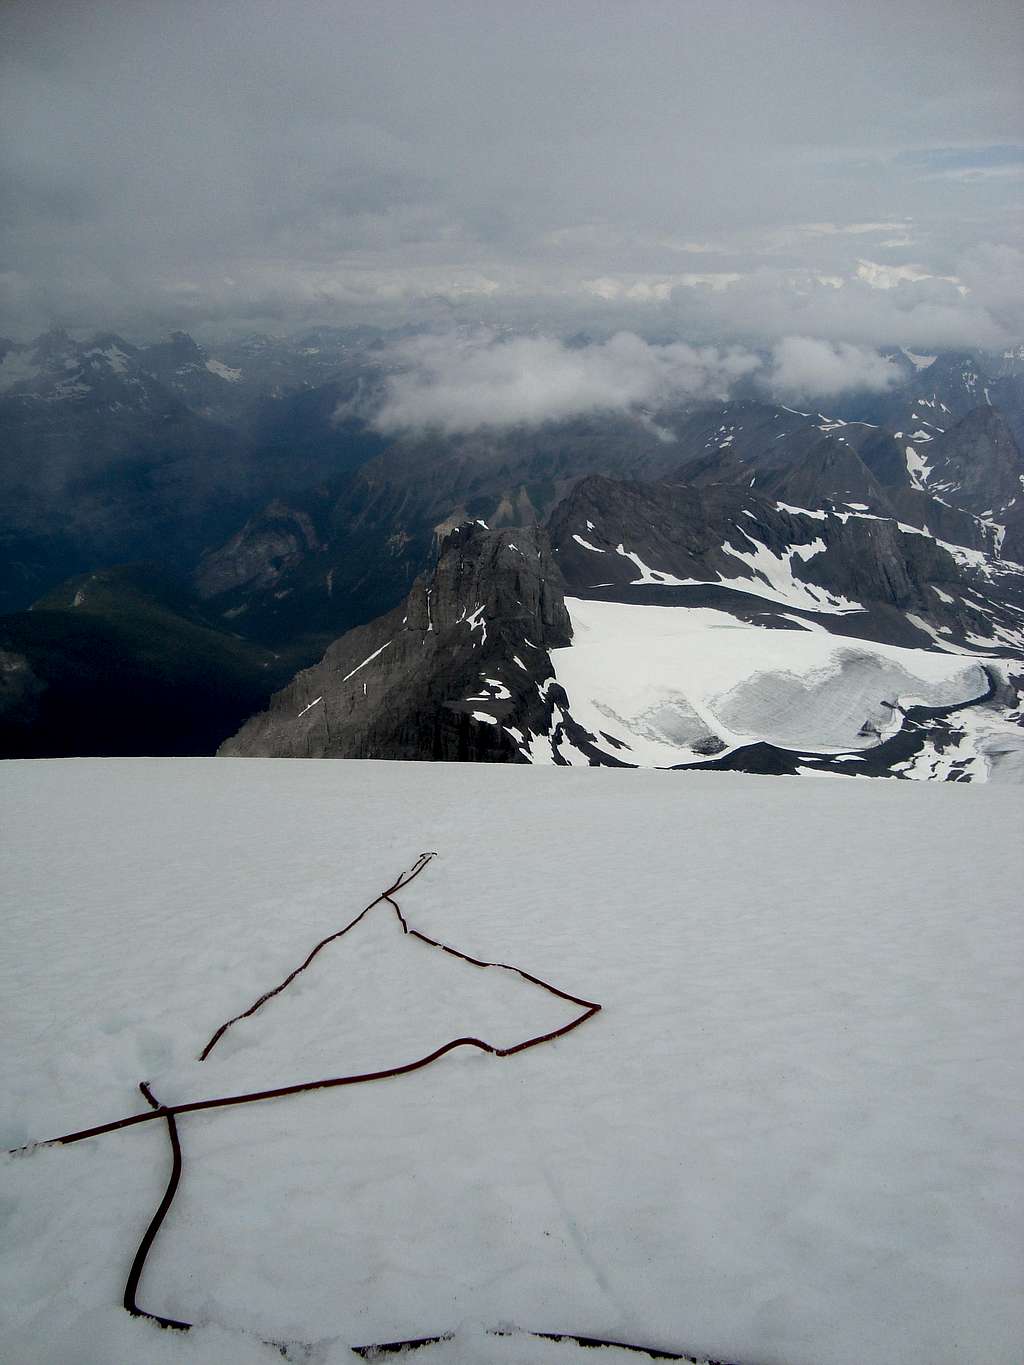 View from the top of the North Face of Mt. Joffre